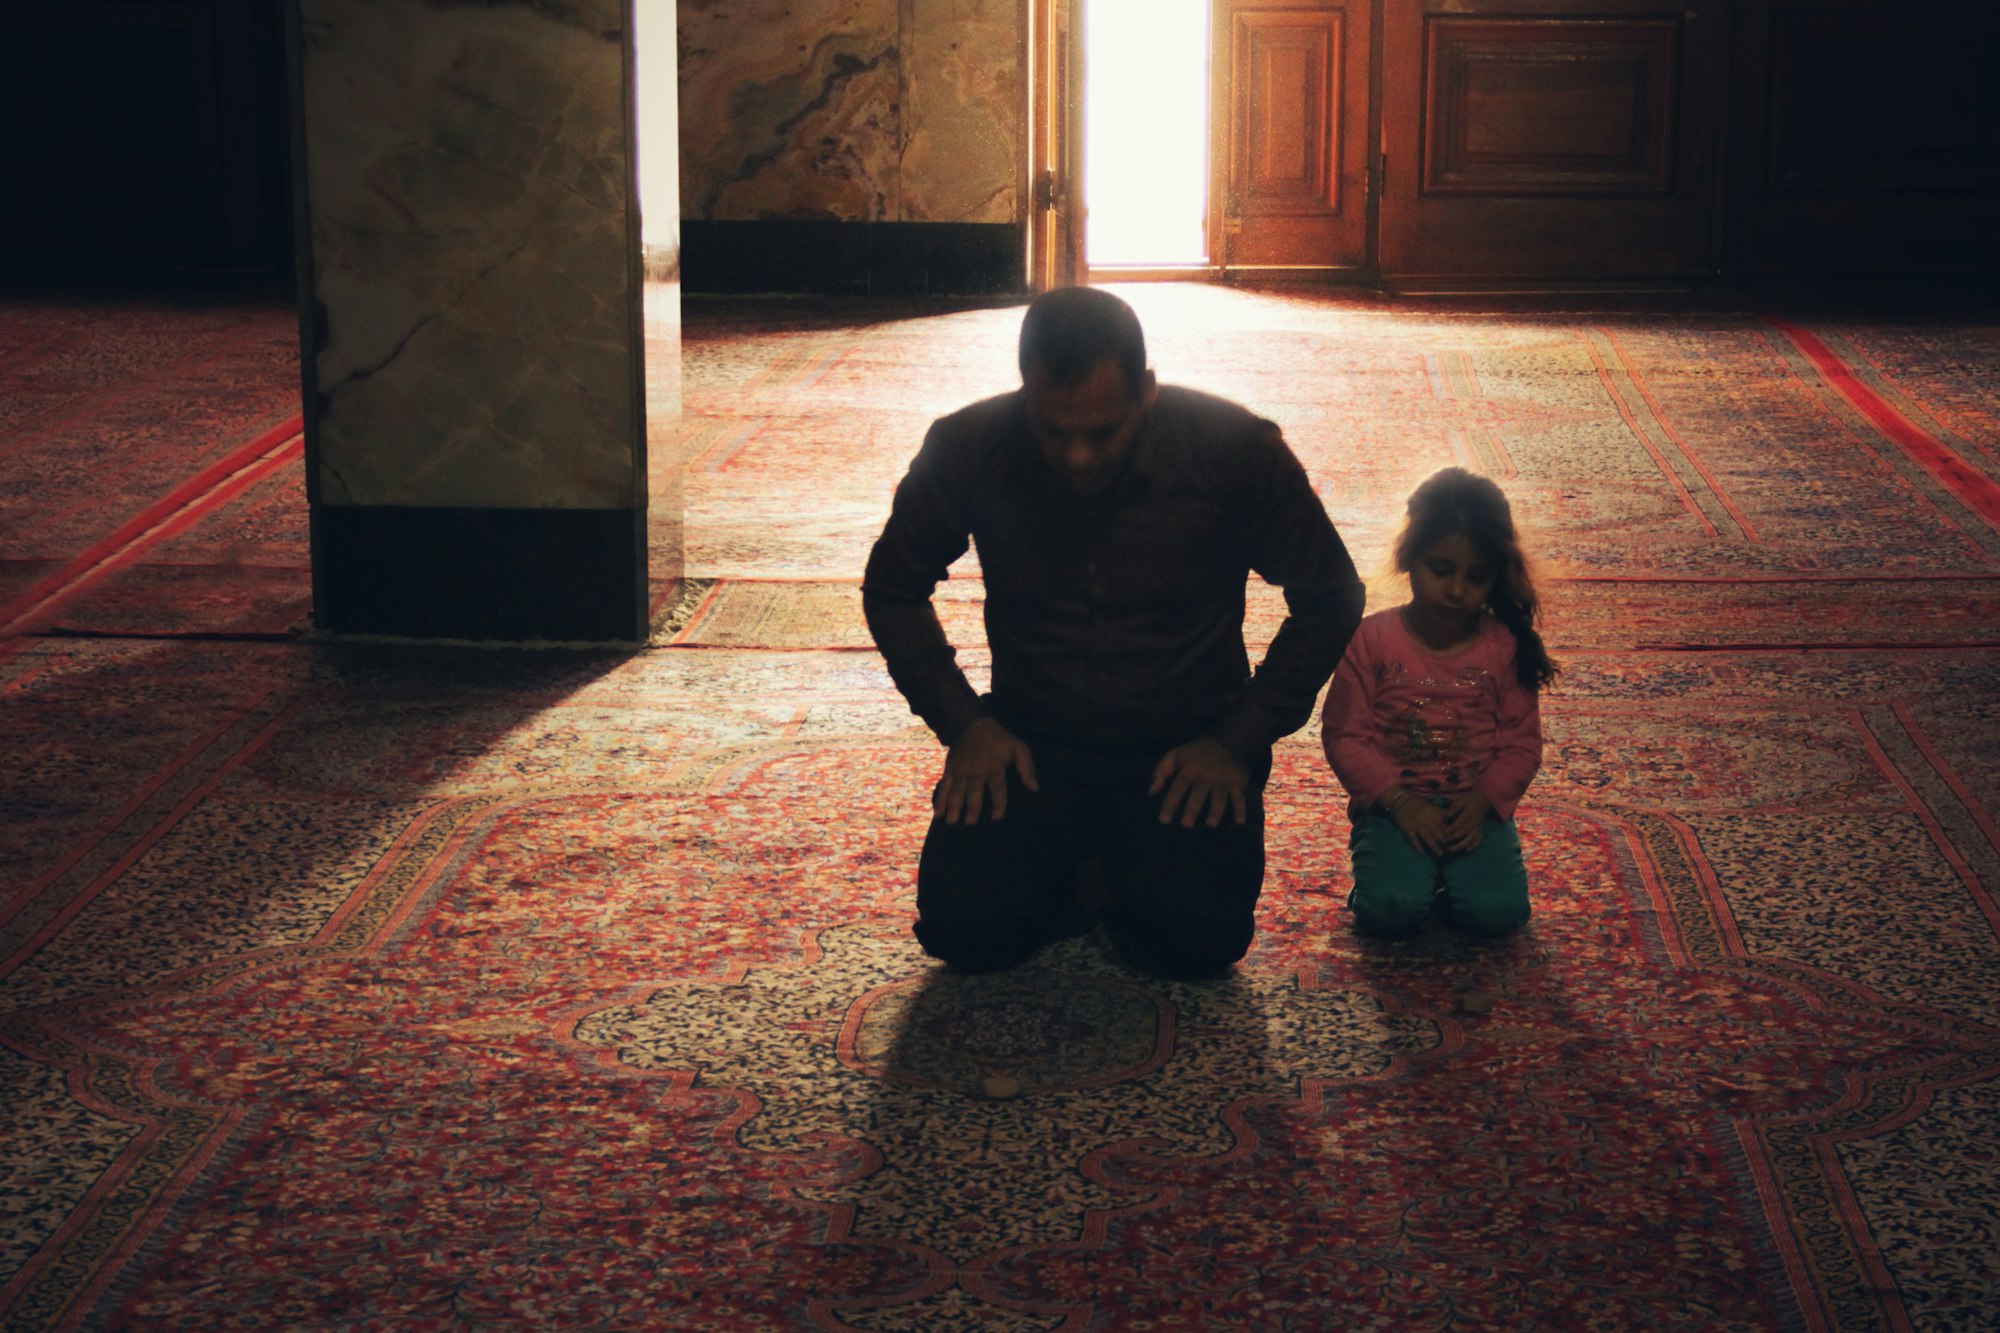 A Father and his Daughter Praying in a Mosque in Yazd, Iran